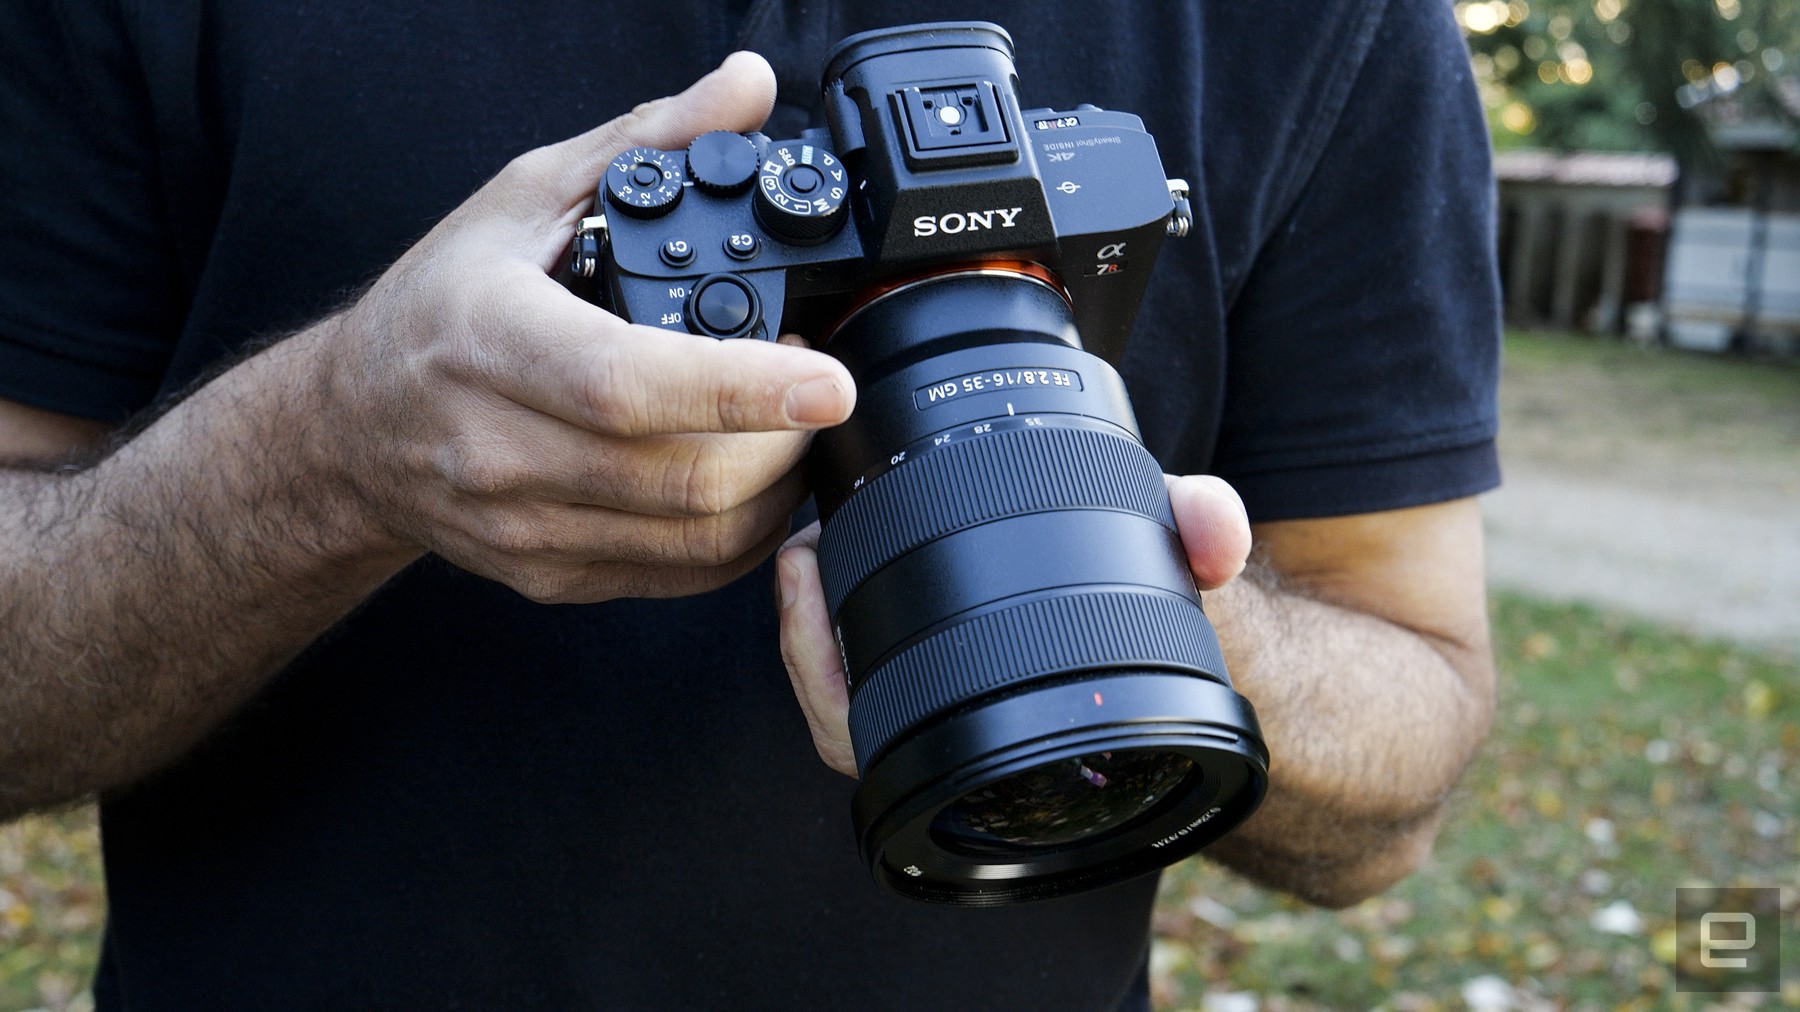 Amazon Prime Day knocks up to $600 off some of Sony's best mirrorless cameras